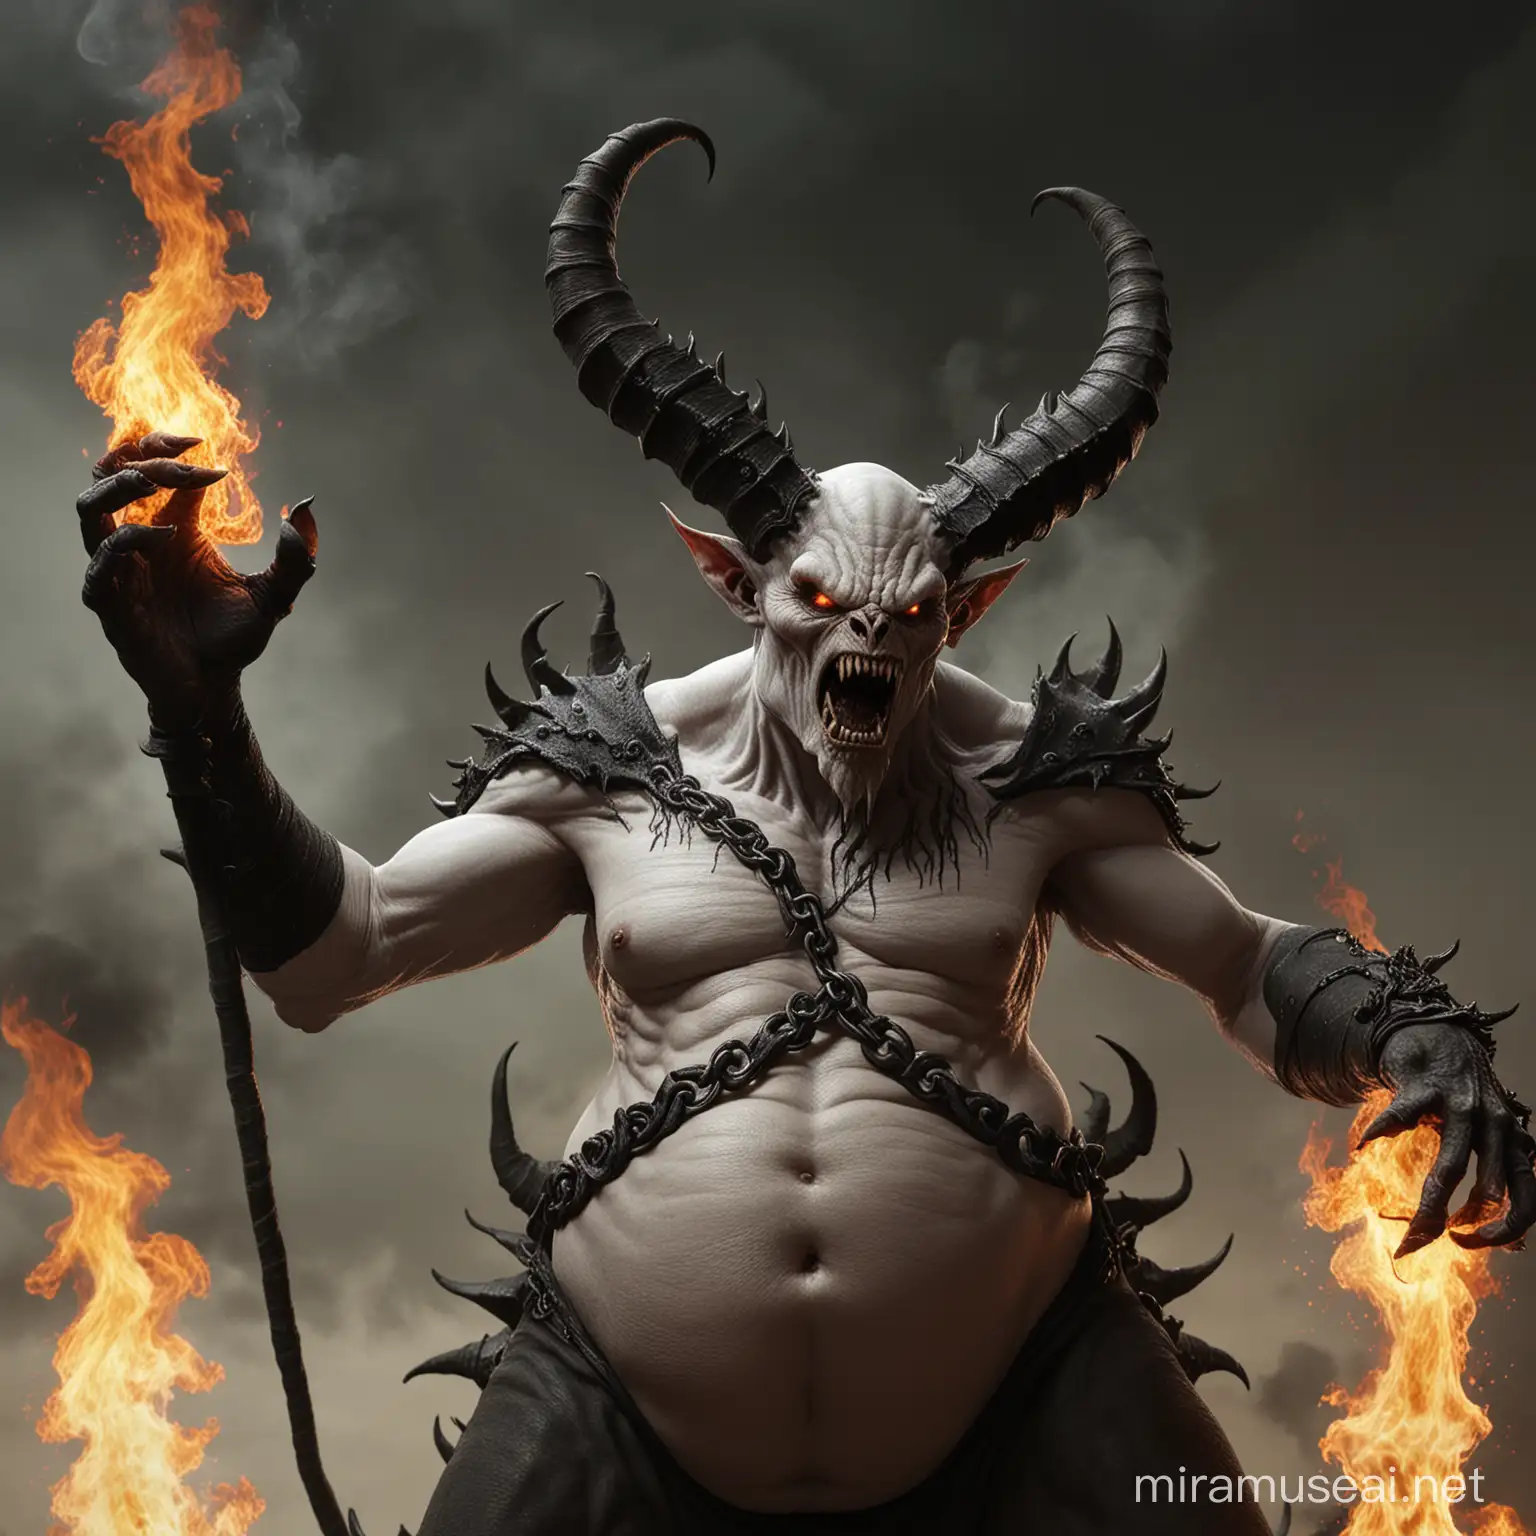 overweight demon, white and black in appearance. Having a great curved horn on top of head. EIght legged with the two flaming hand, realistic, high cgi